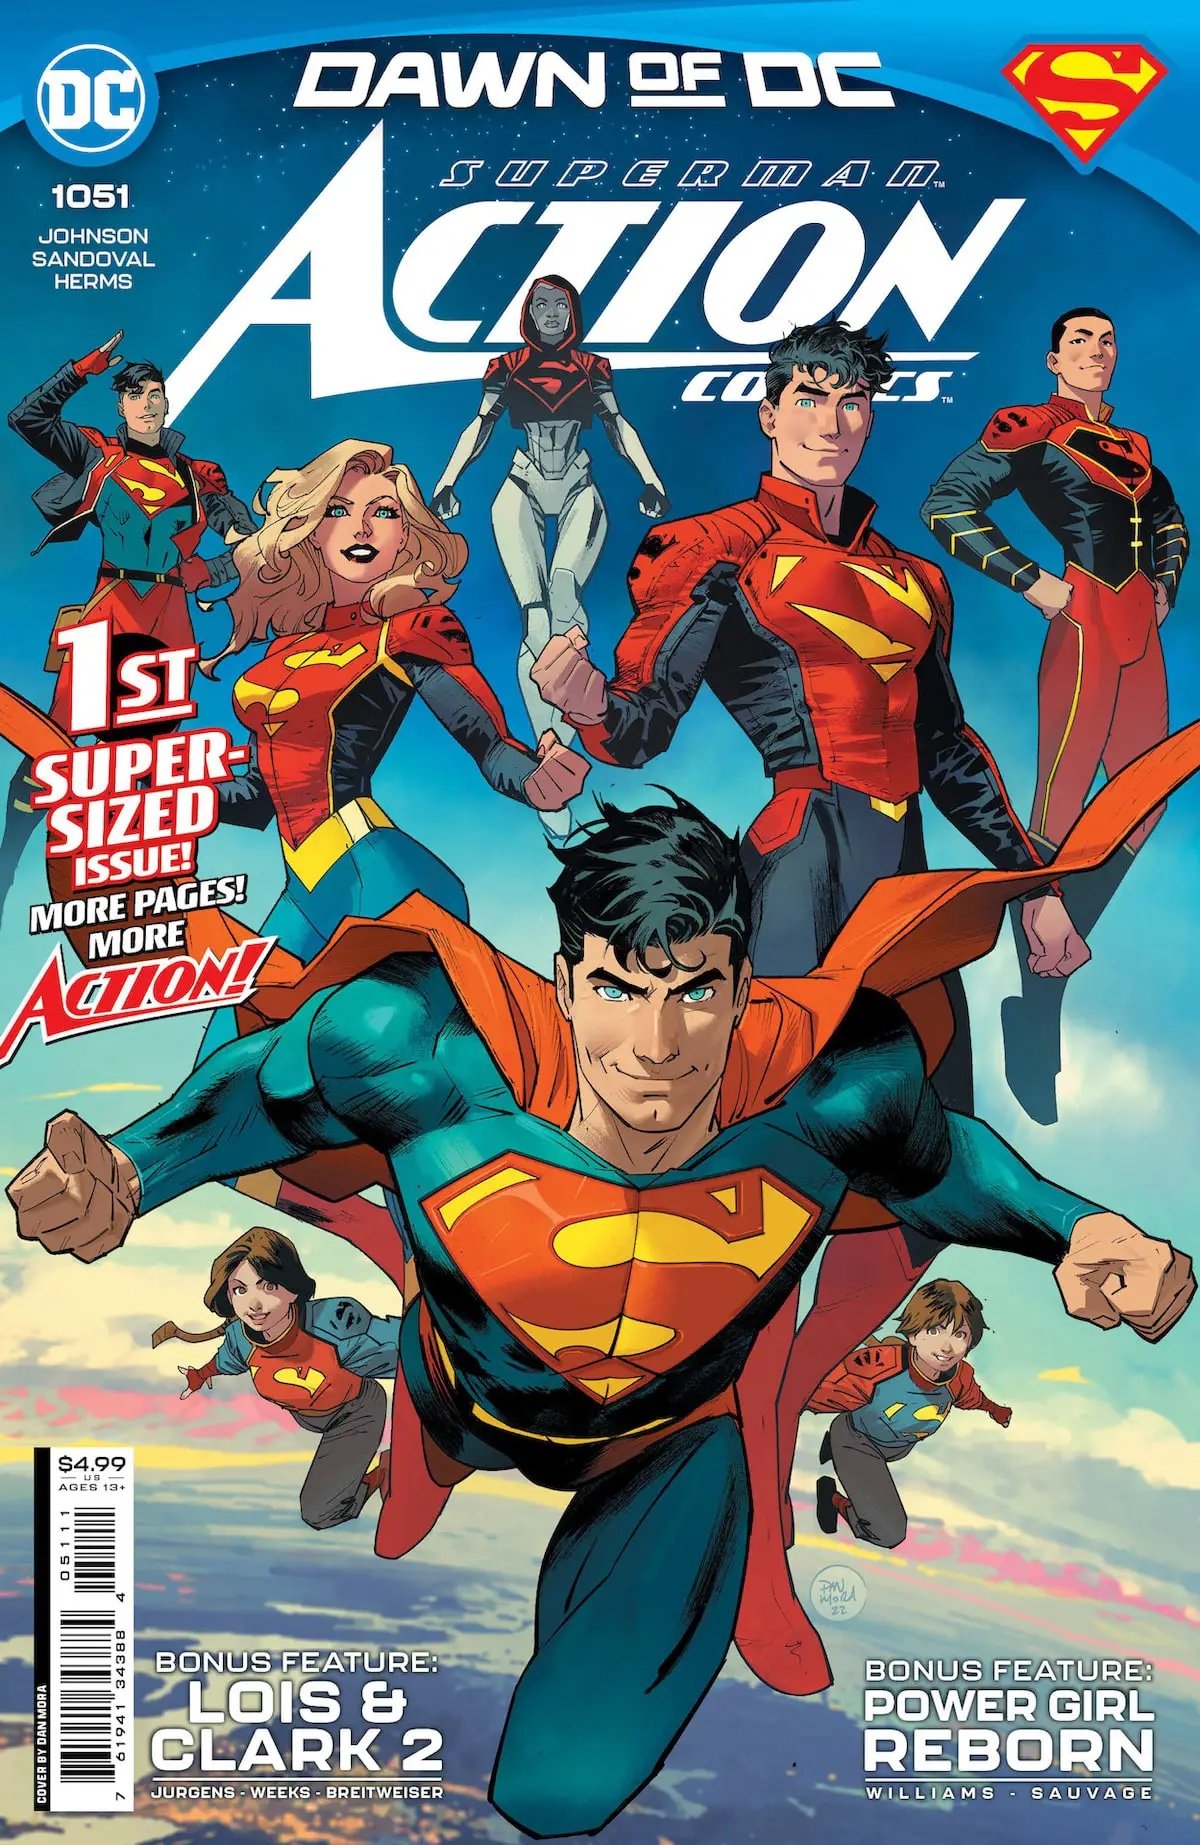 Action Comics #1051 cover shows Superman and the Super-Fam.